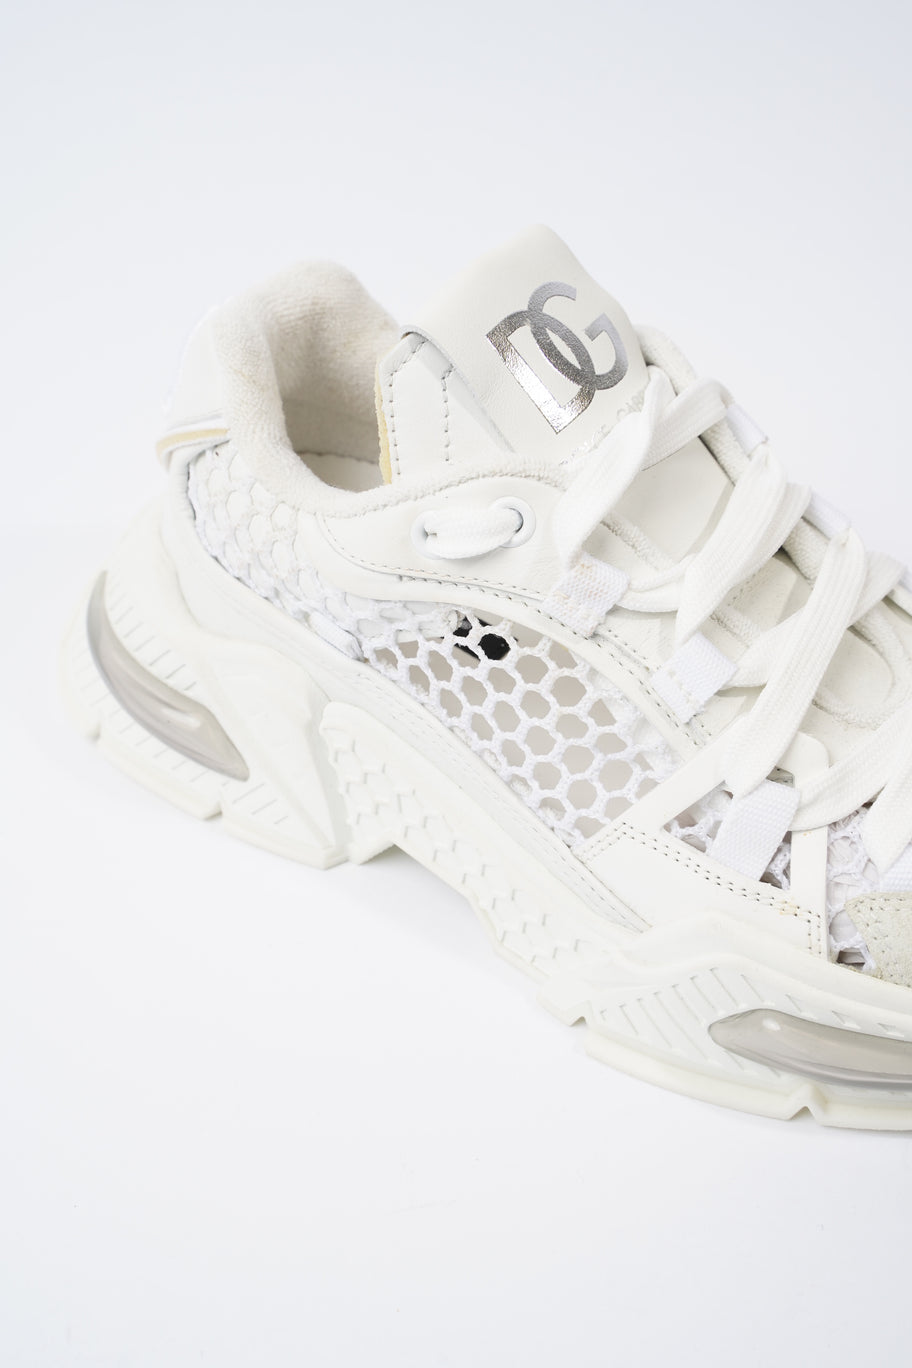 Airmaster Sneakers White Leather EU 37.5 UK 4.5 Image 9